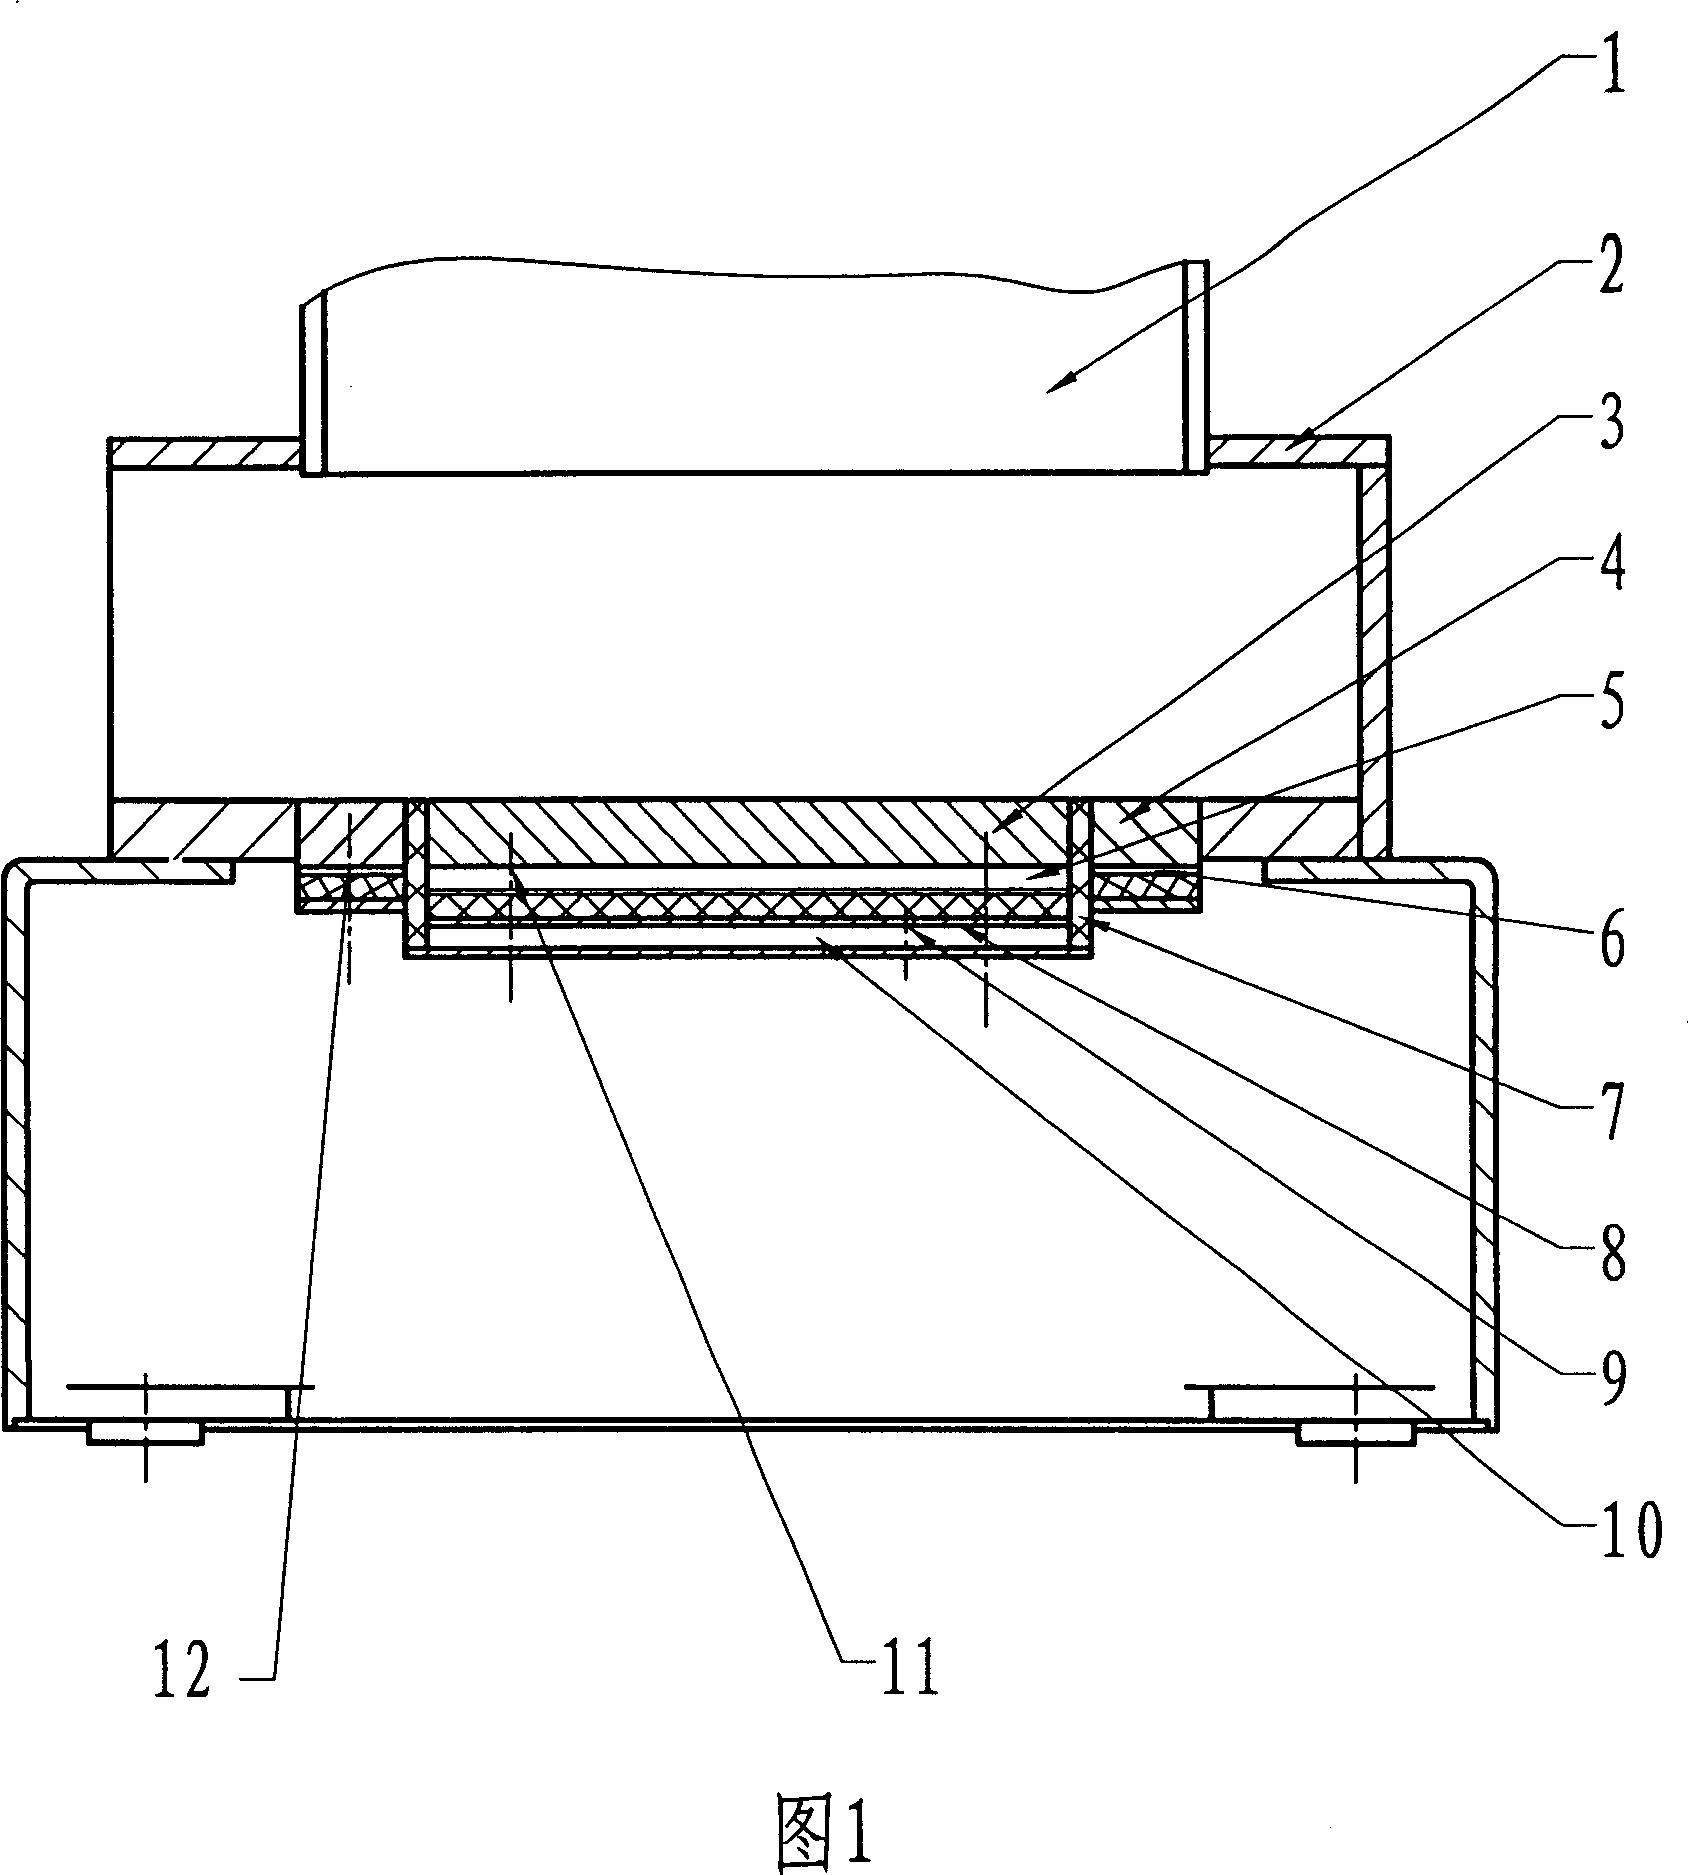 Method for testing insulating property of textile